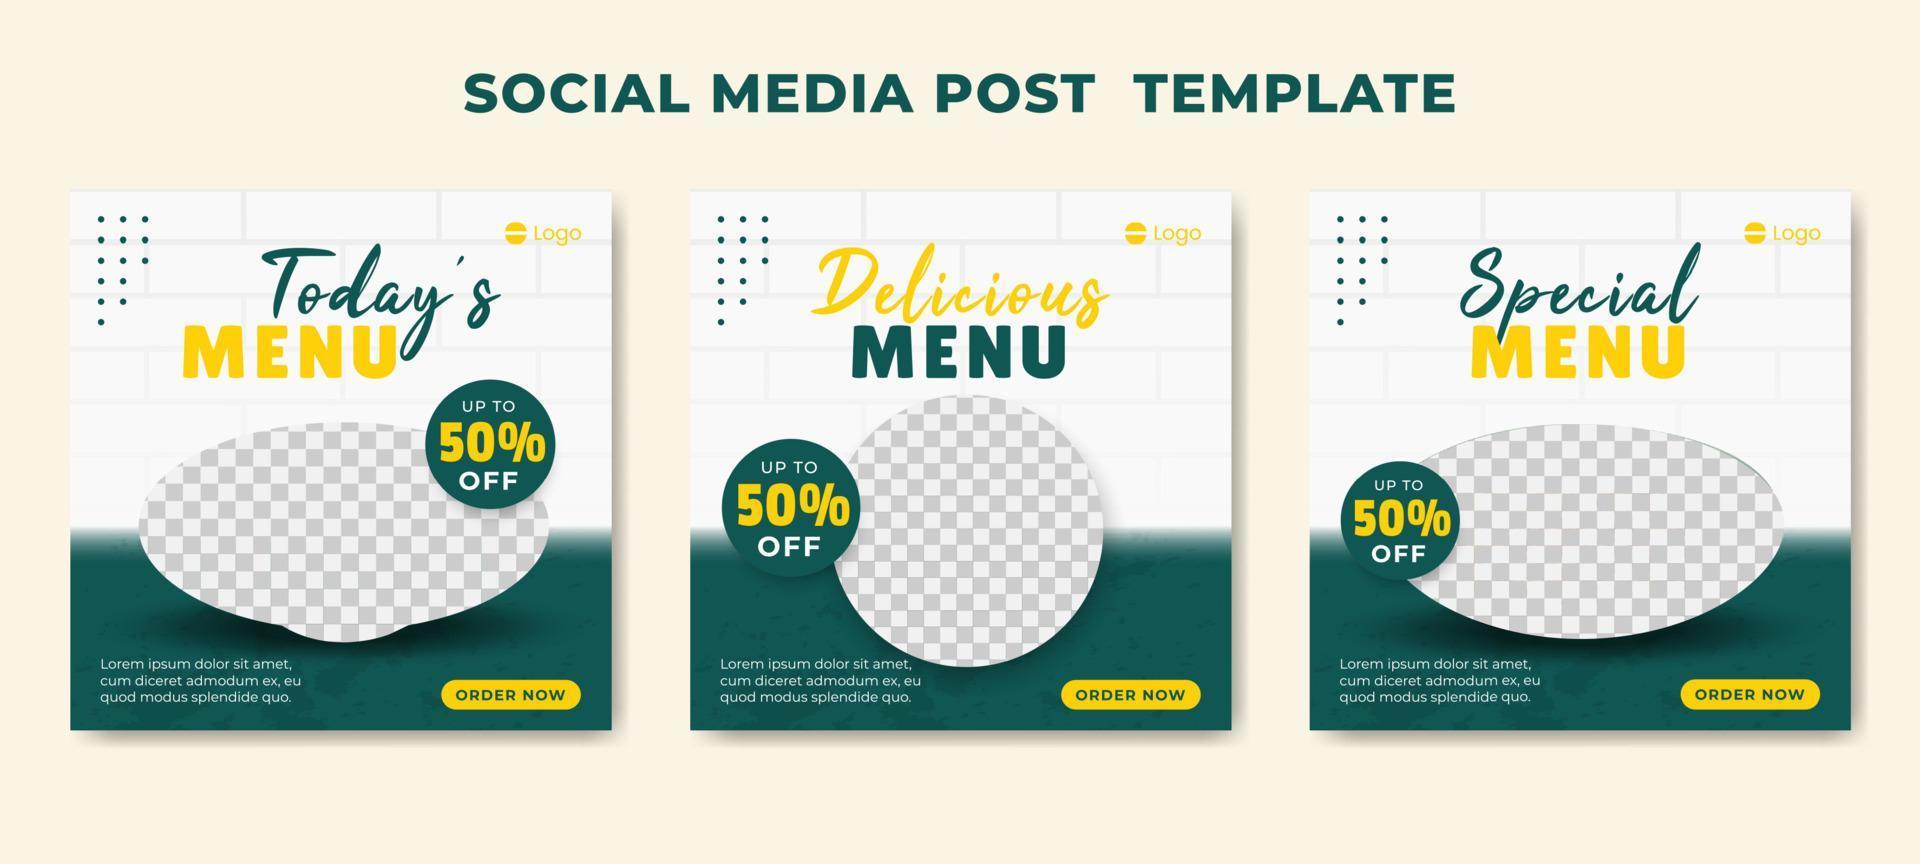 Food social media post pizza template. vector illustration. Collection of editable square banner template designs for food posts. For Social Media Post restaurants and culinary.